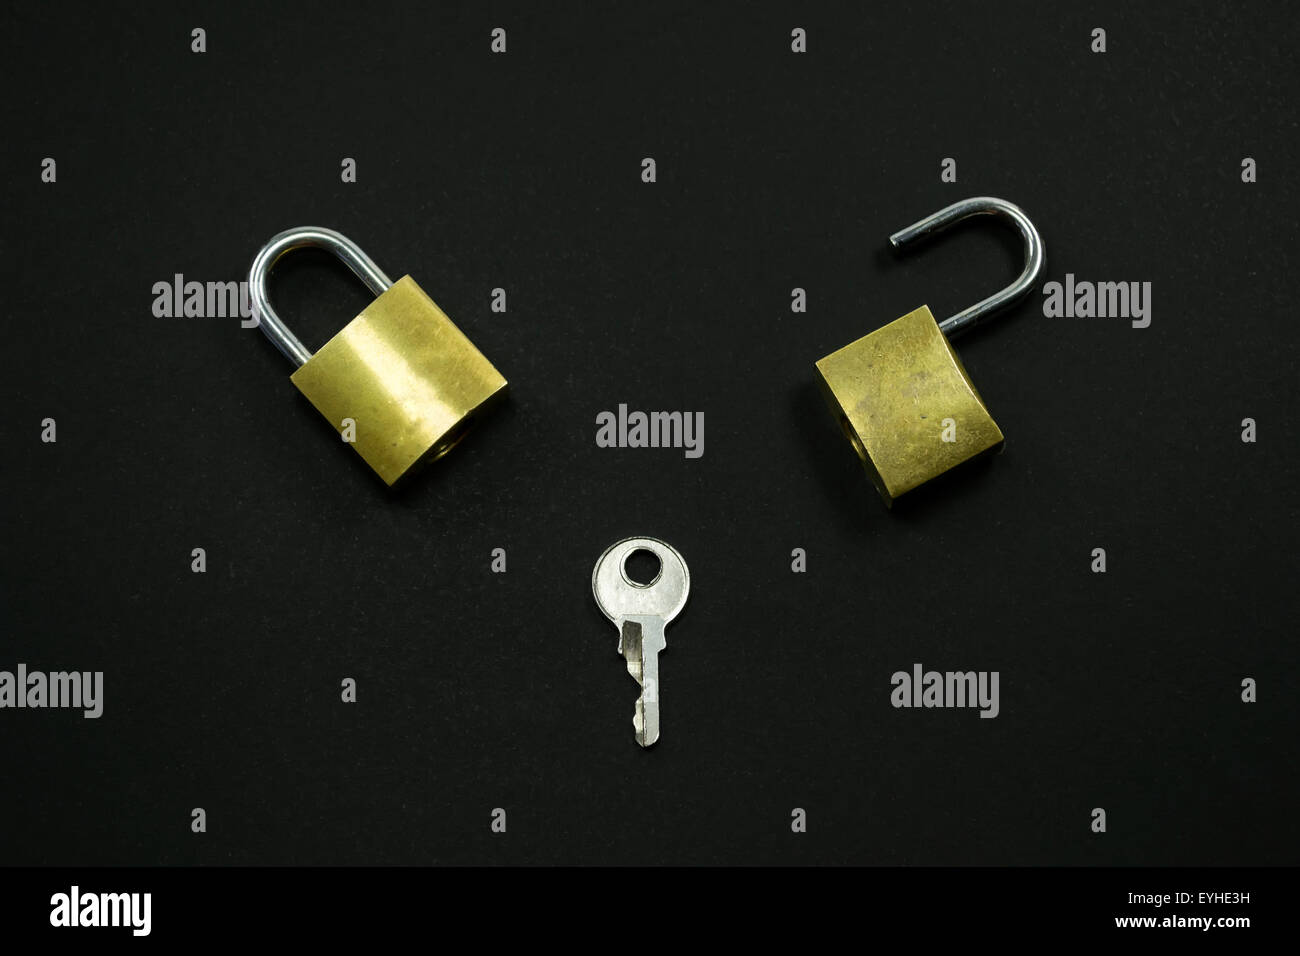 Two small locks and a key against a black background , conceptual image about problem solving process Stock Photo